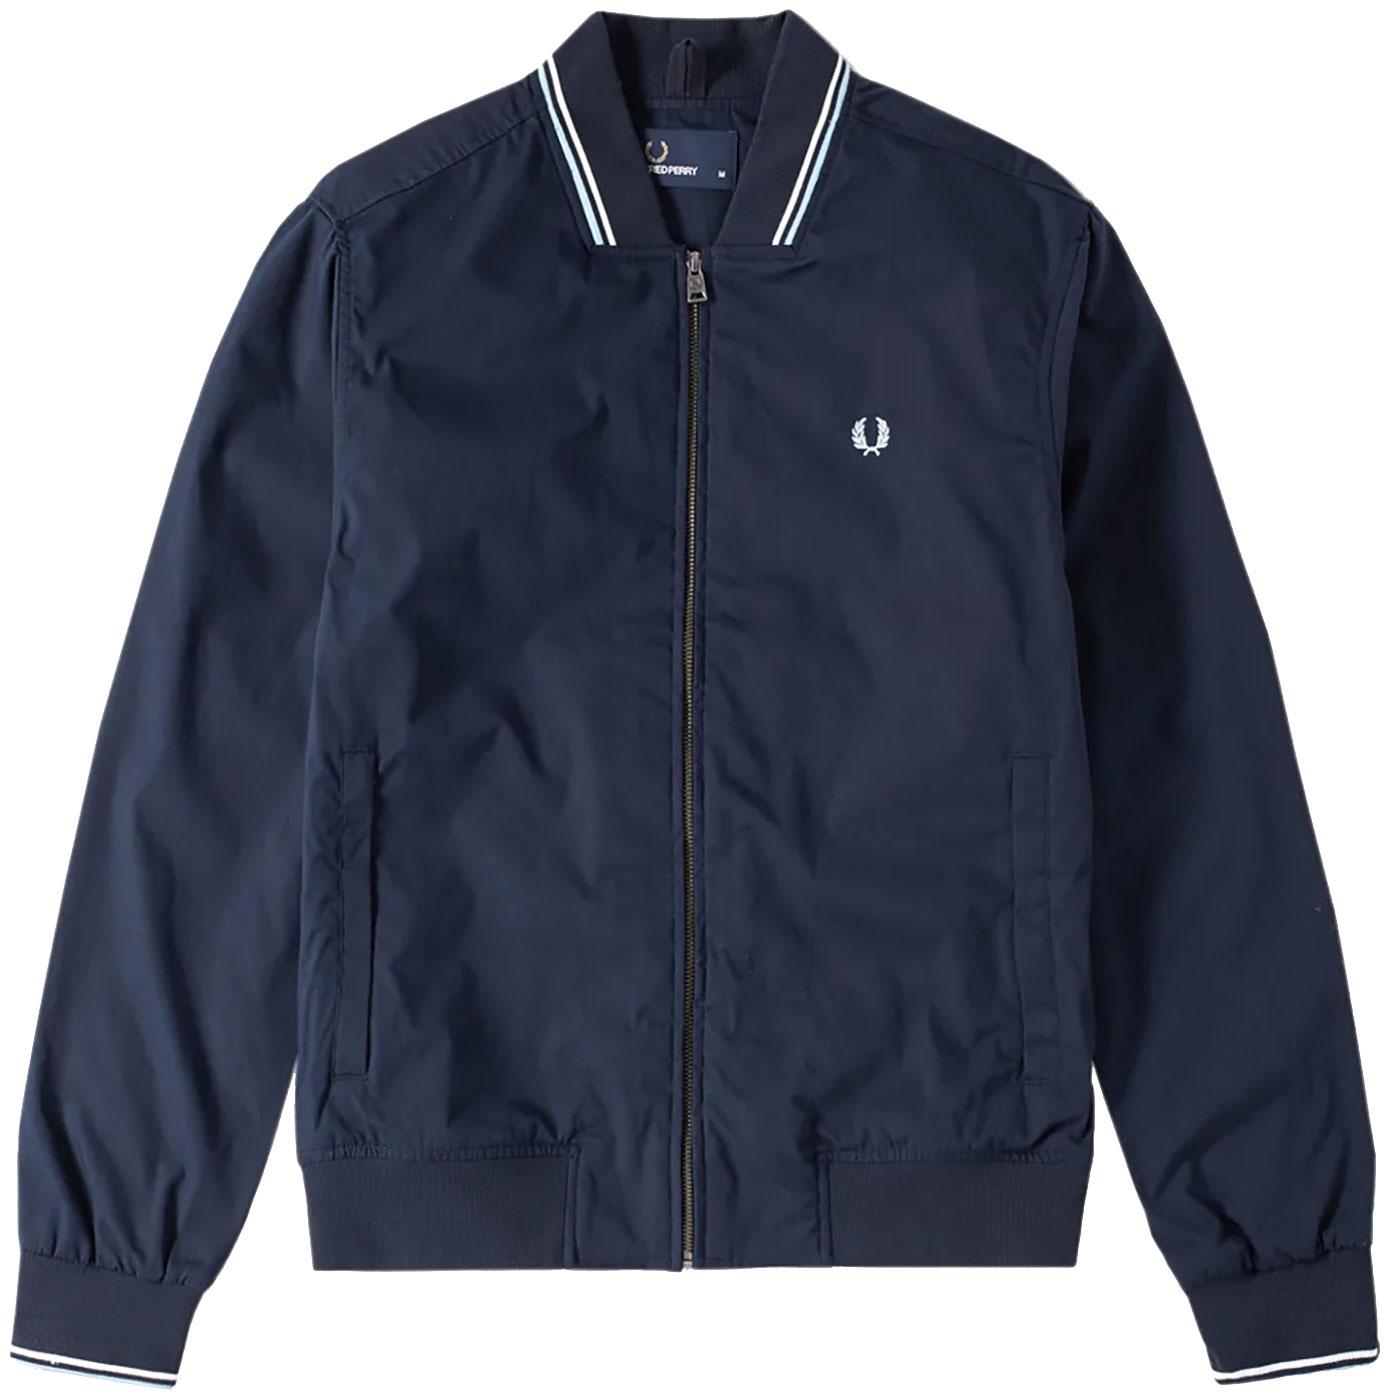 FRED PERRY Men's Twin Tipped Mod Bomber Jacket